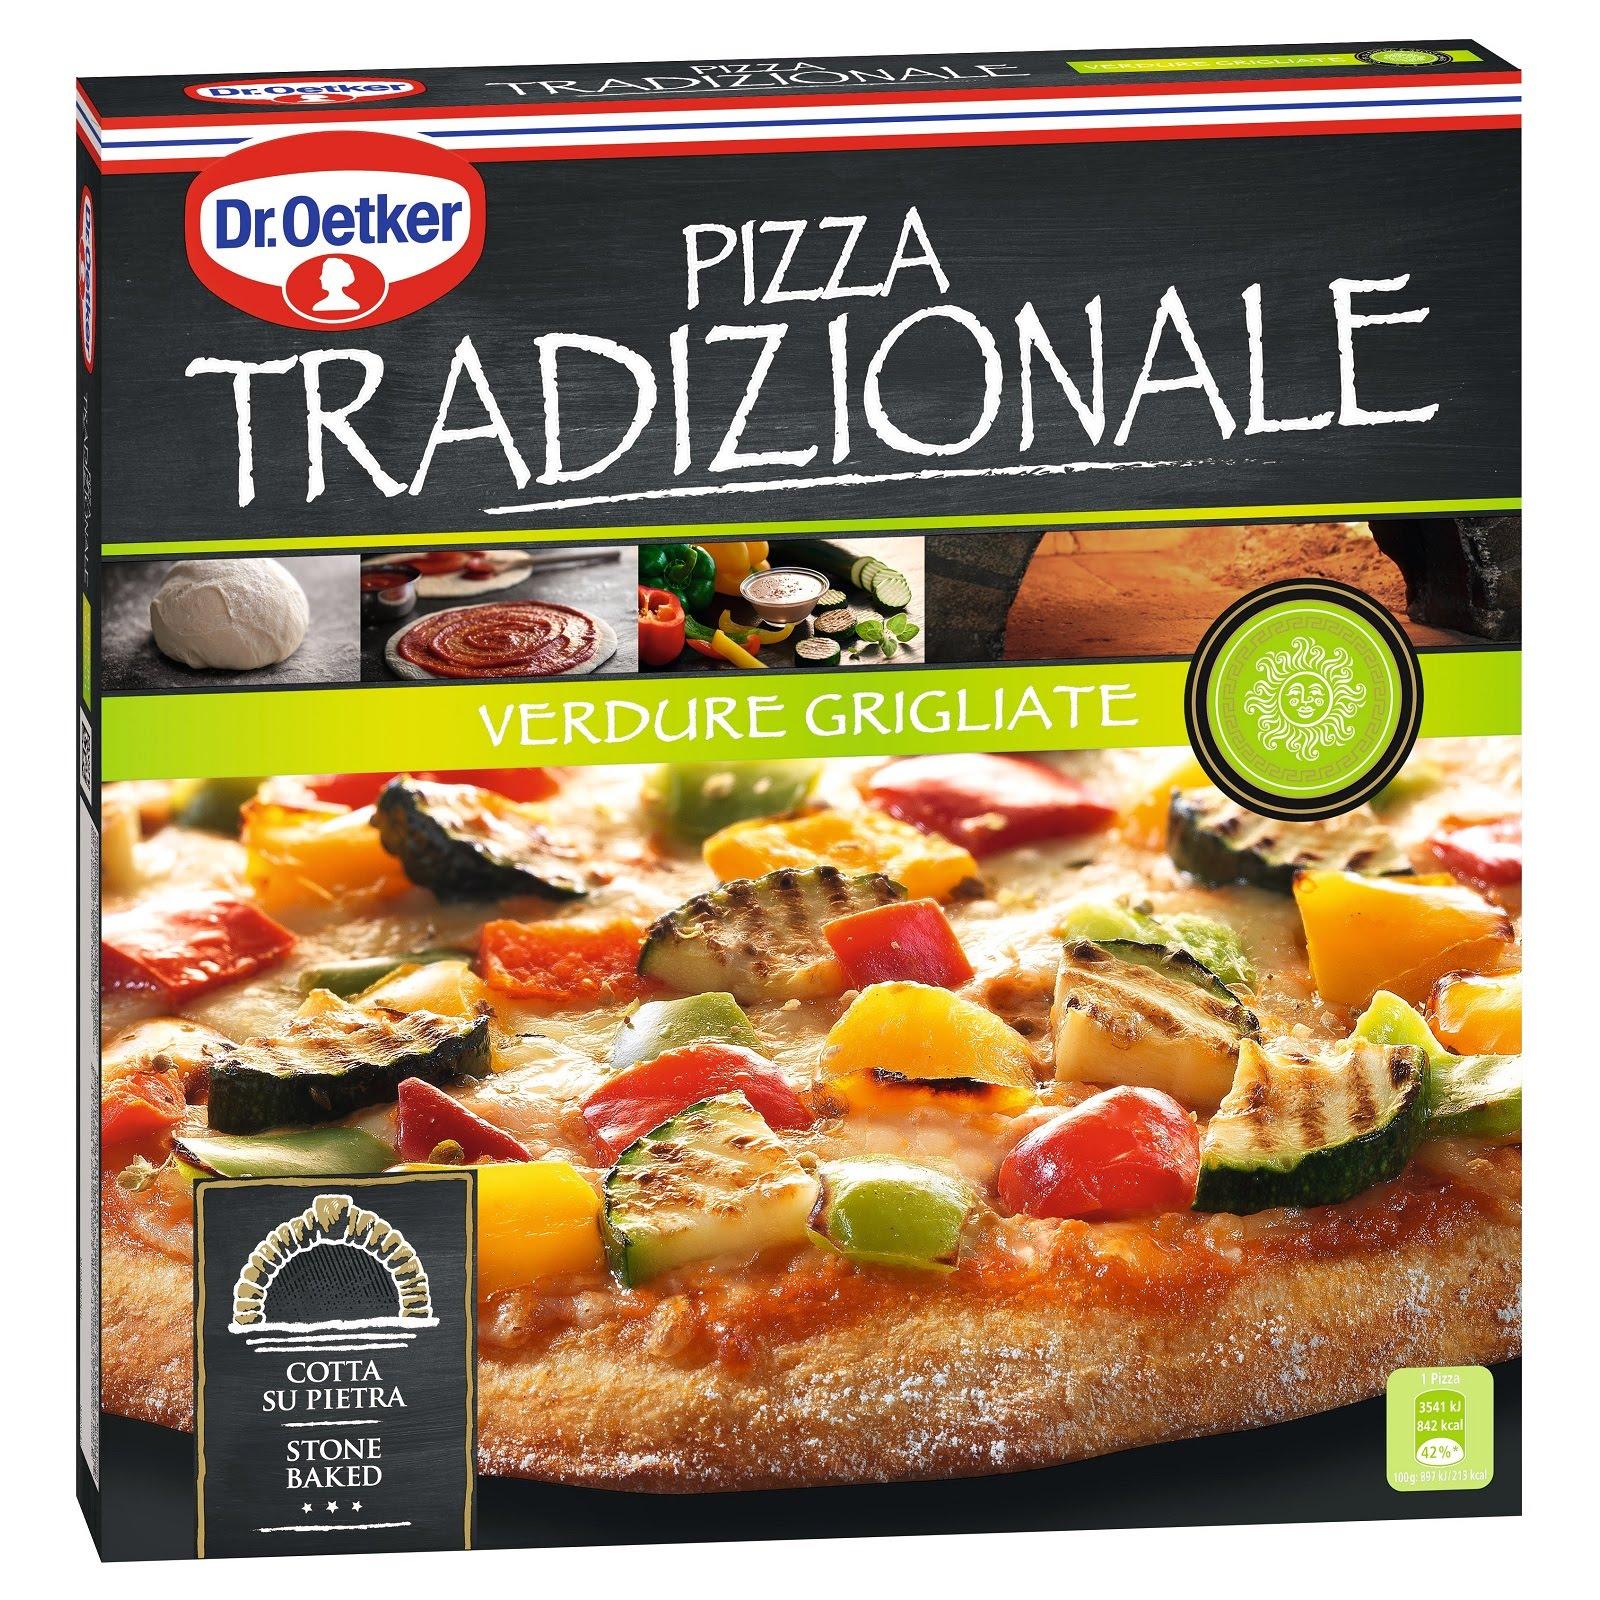 Dr Oetker Tradizionale Grilled Vegetables Pizza Frozen From Redmart Diffmarts Singapore